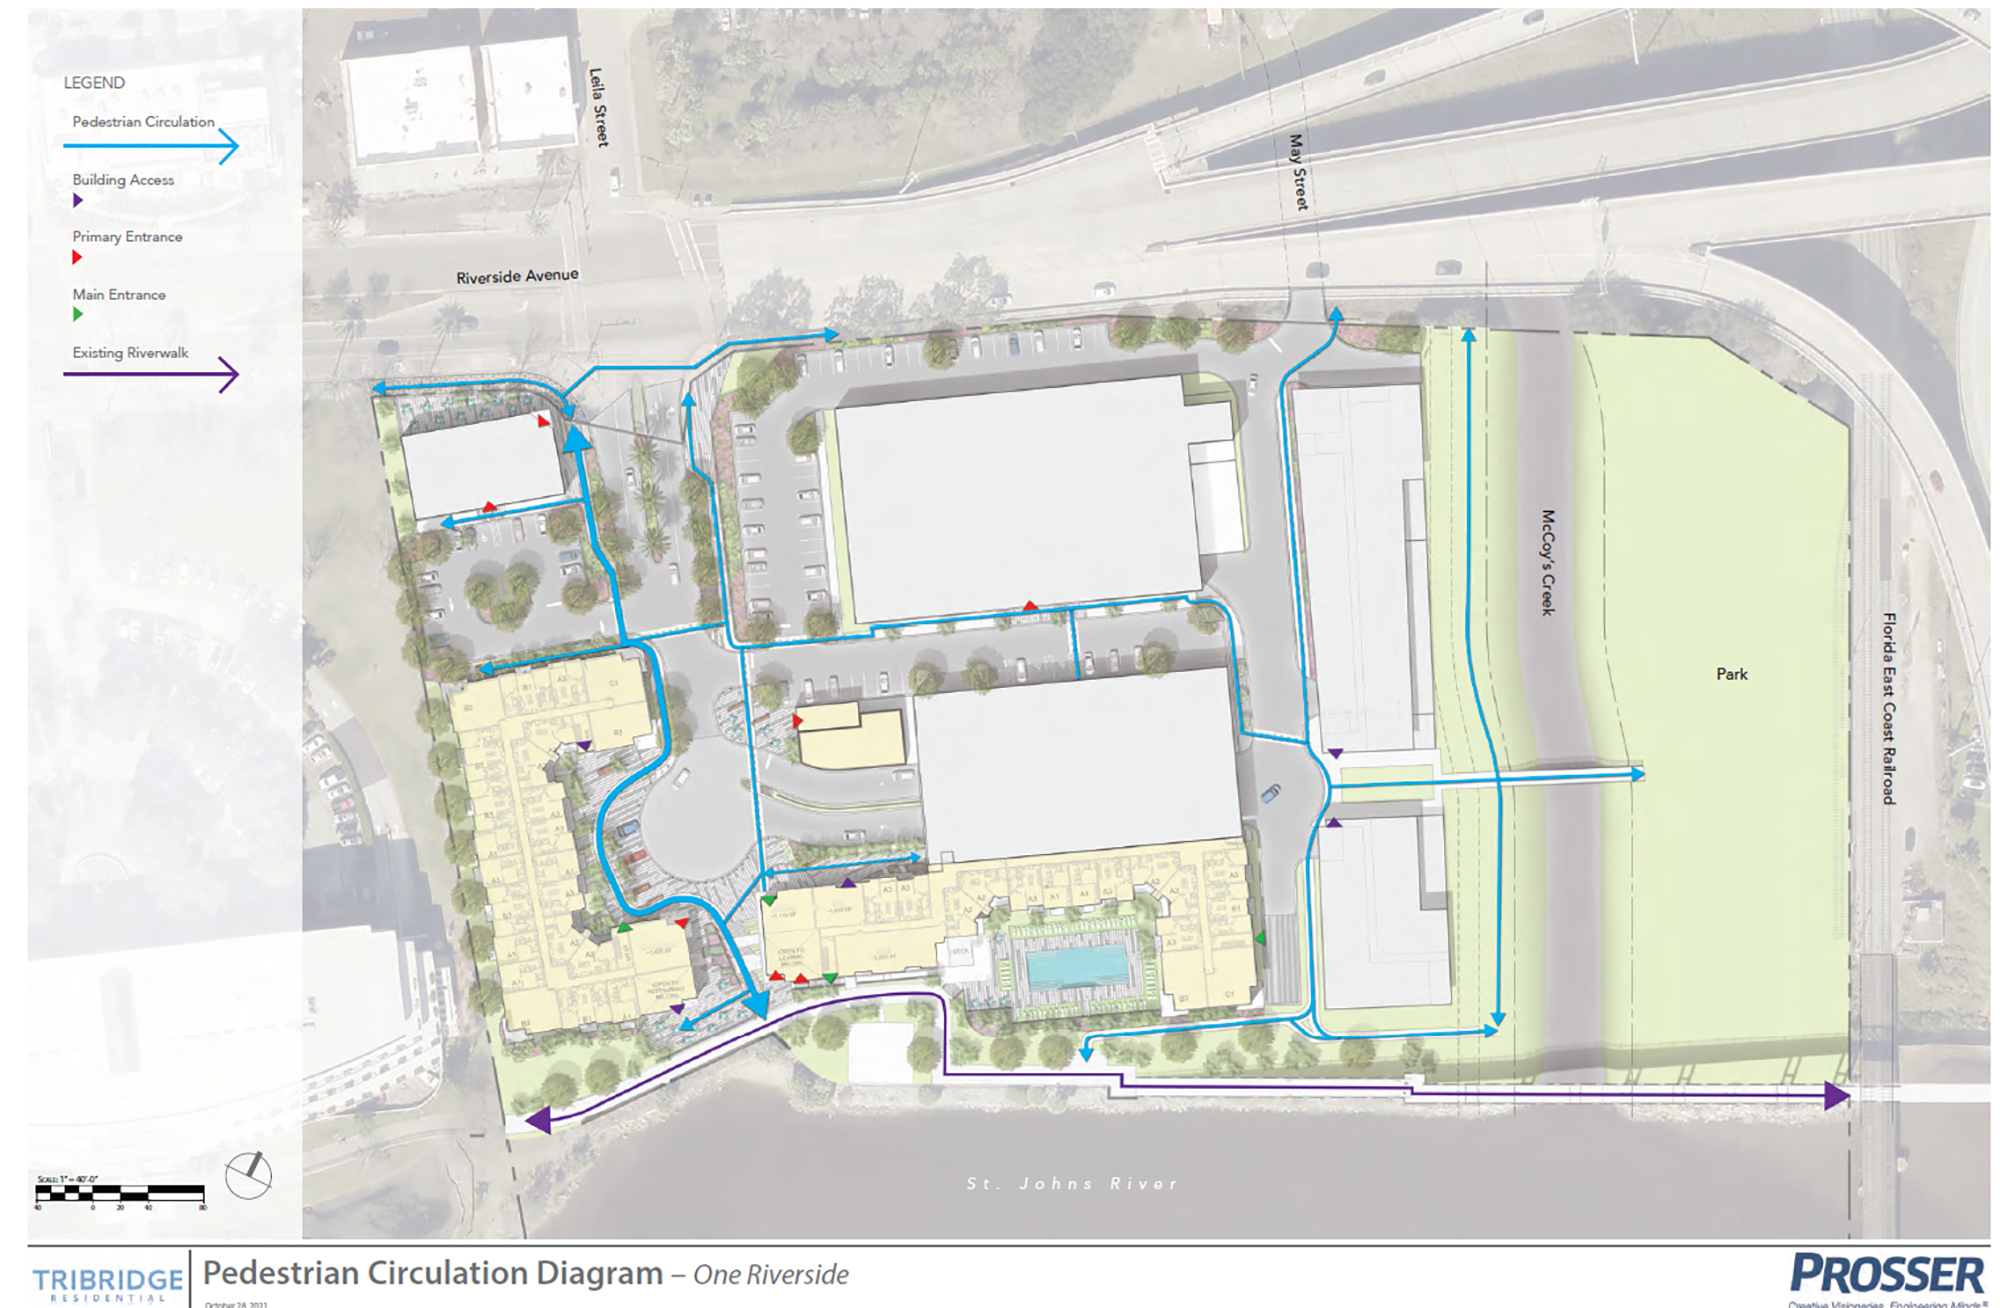 The pedestrian circulation diagram for the project.